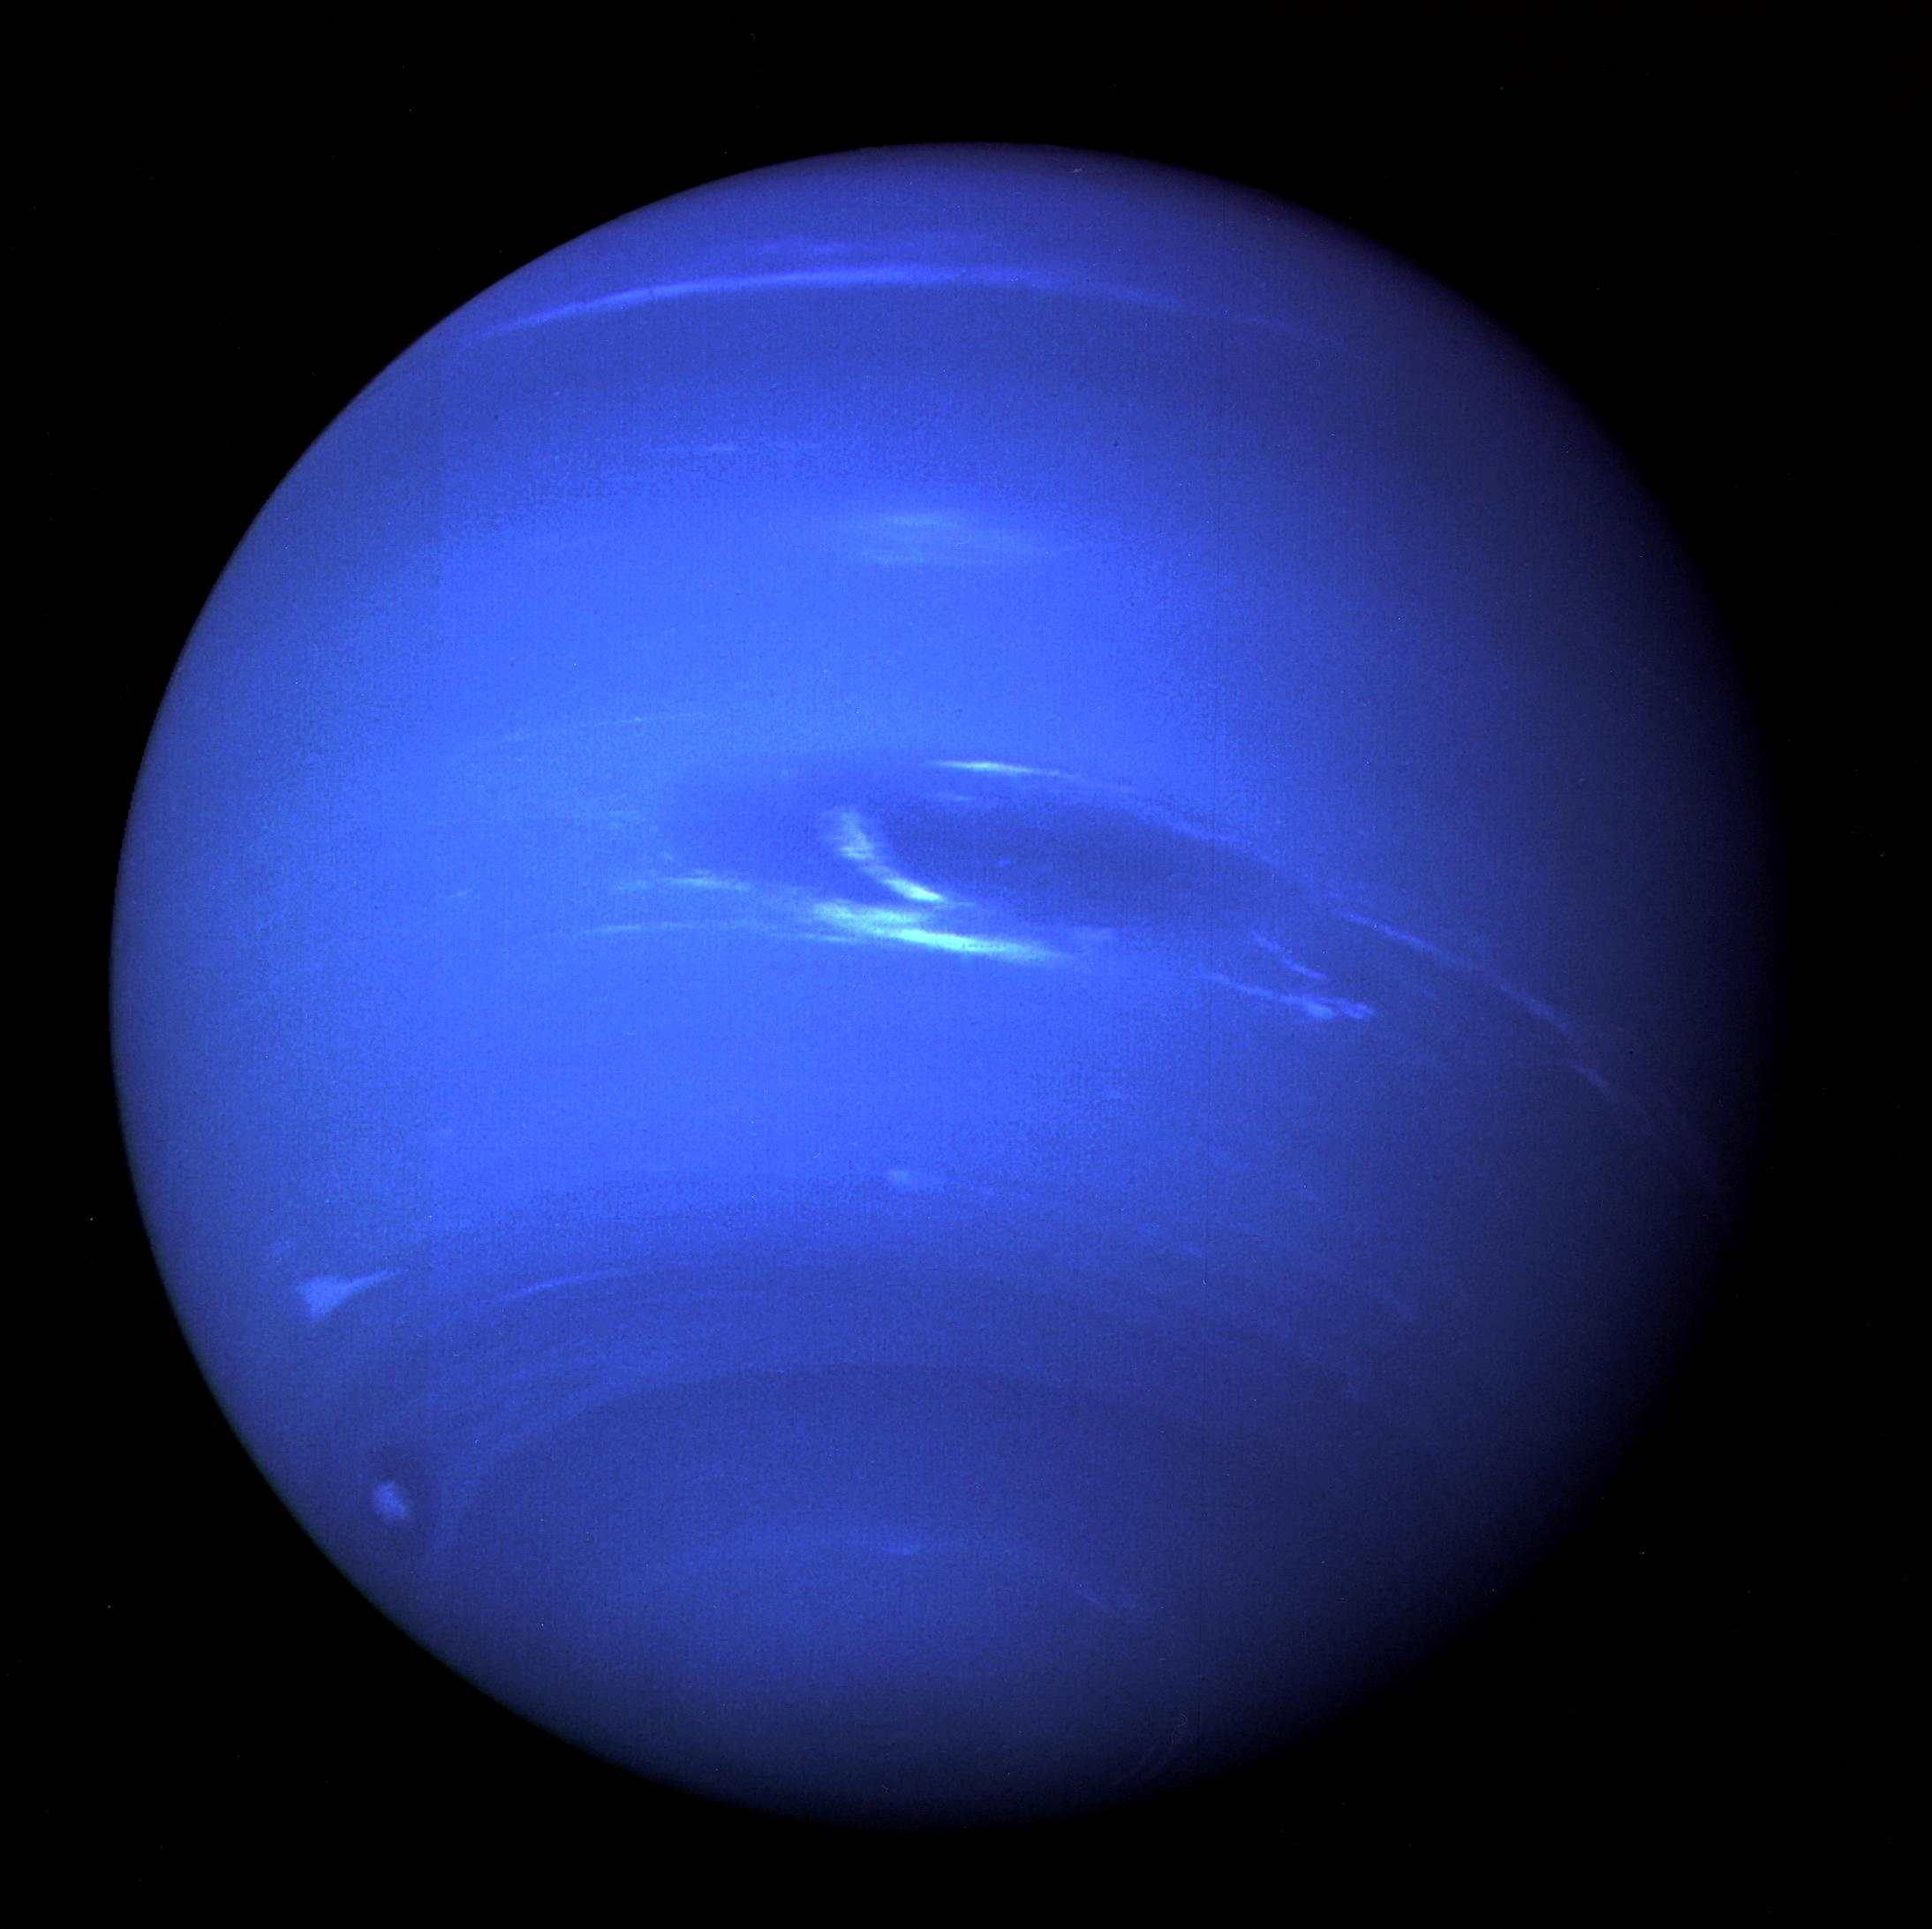 Planet Neptune photographed by NASA spacecraft Voyager 2